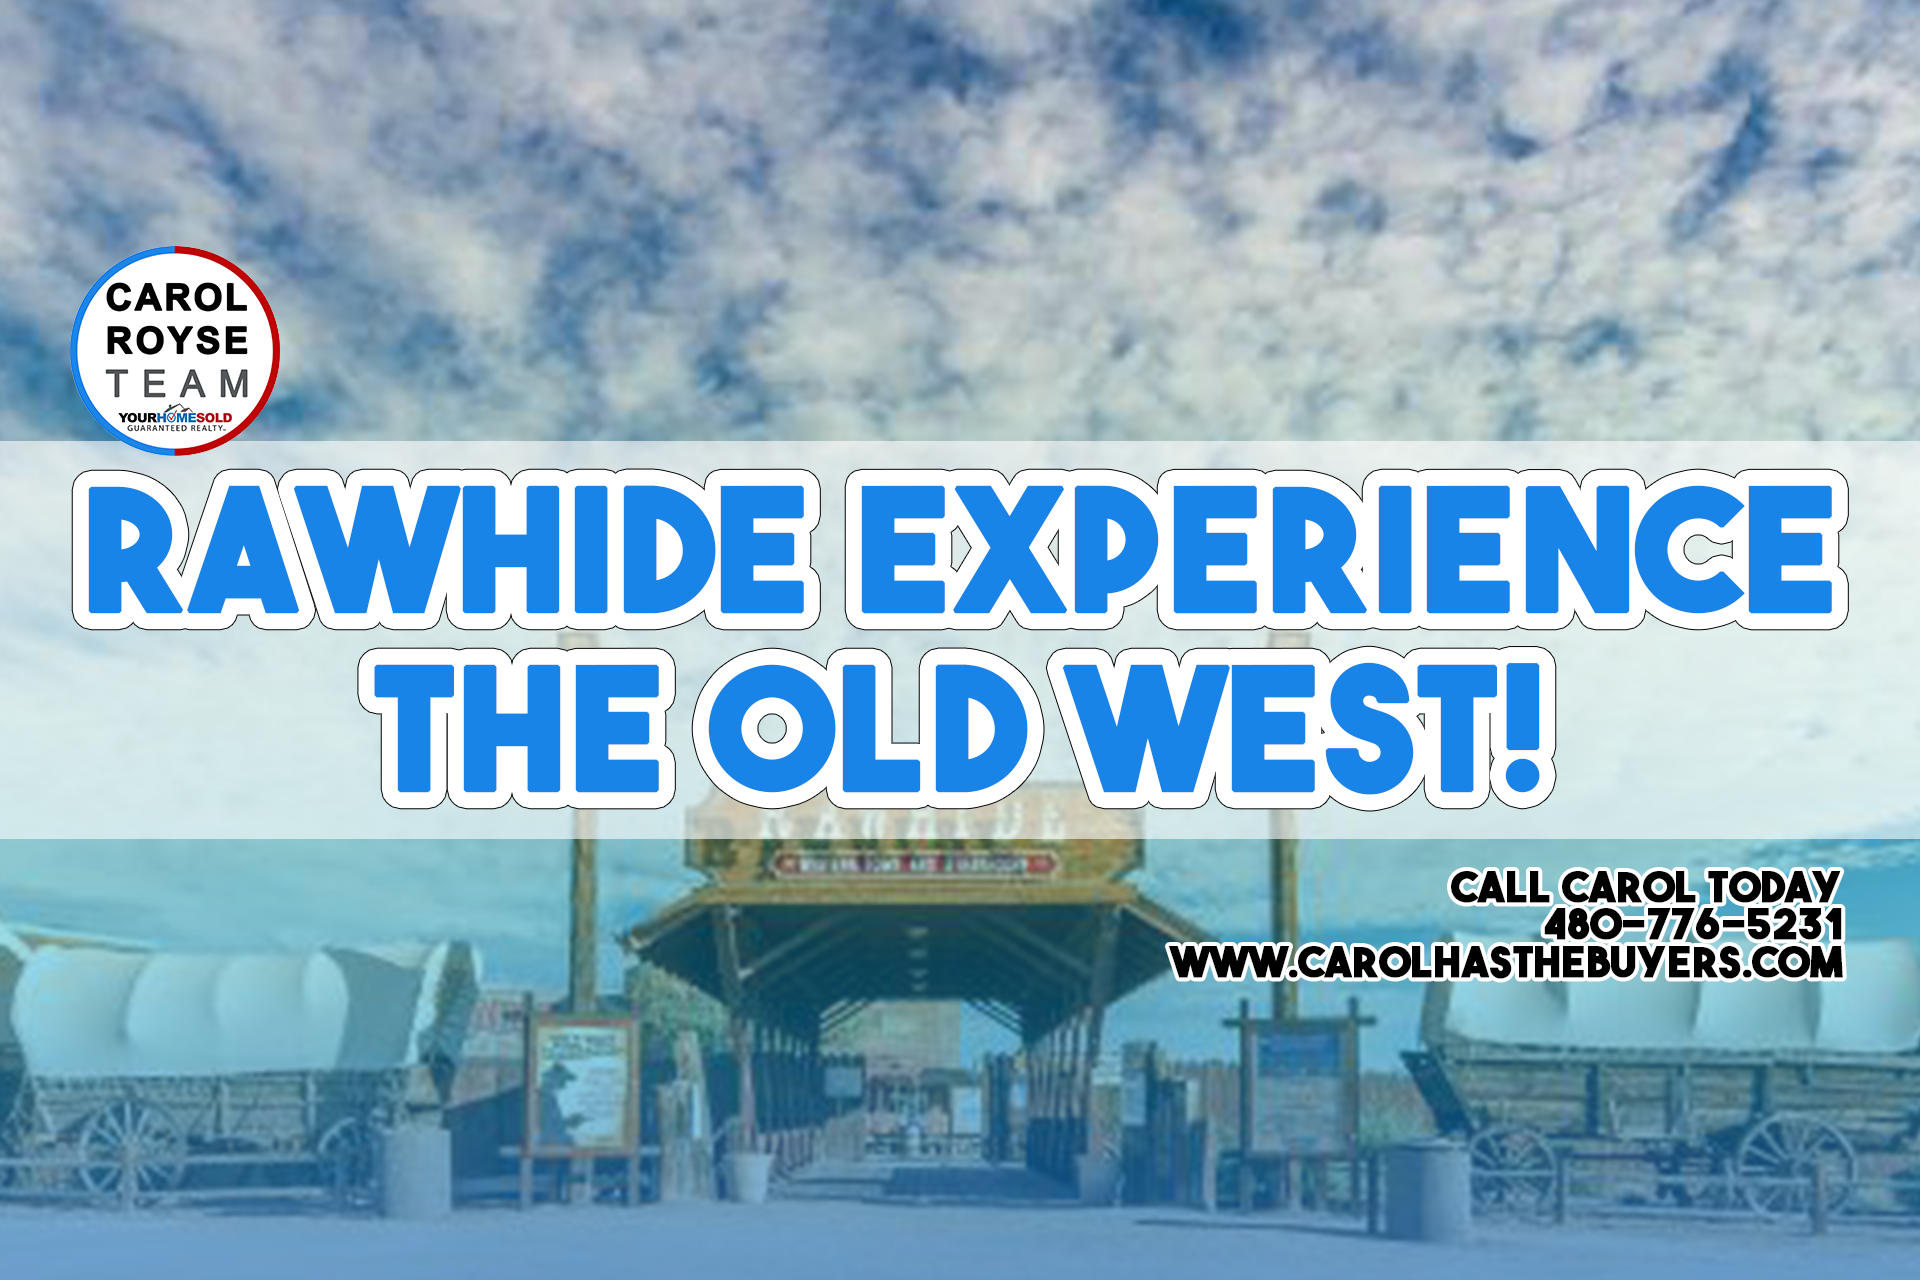 Rawhide Experience the Old West!